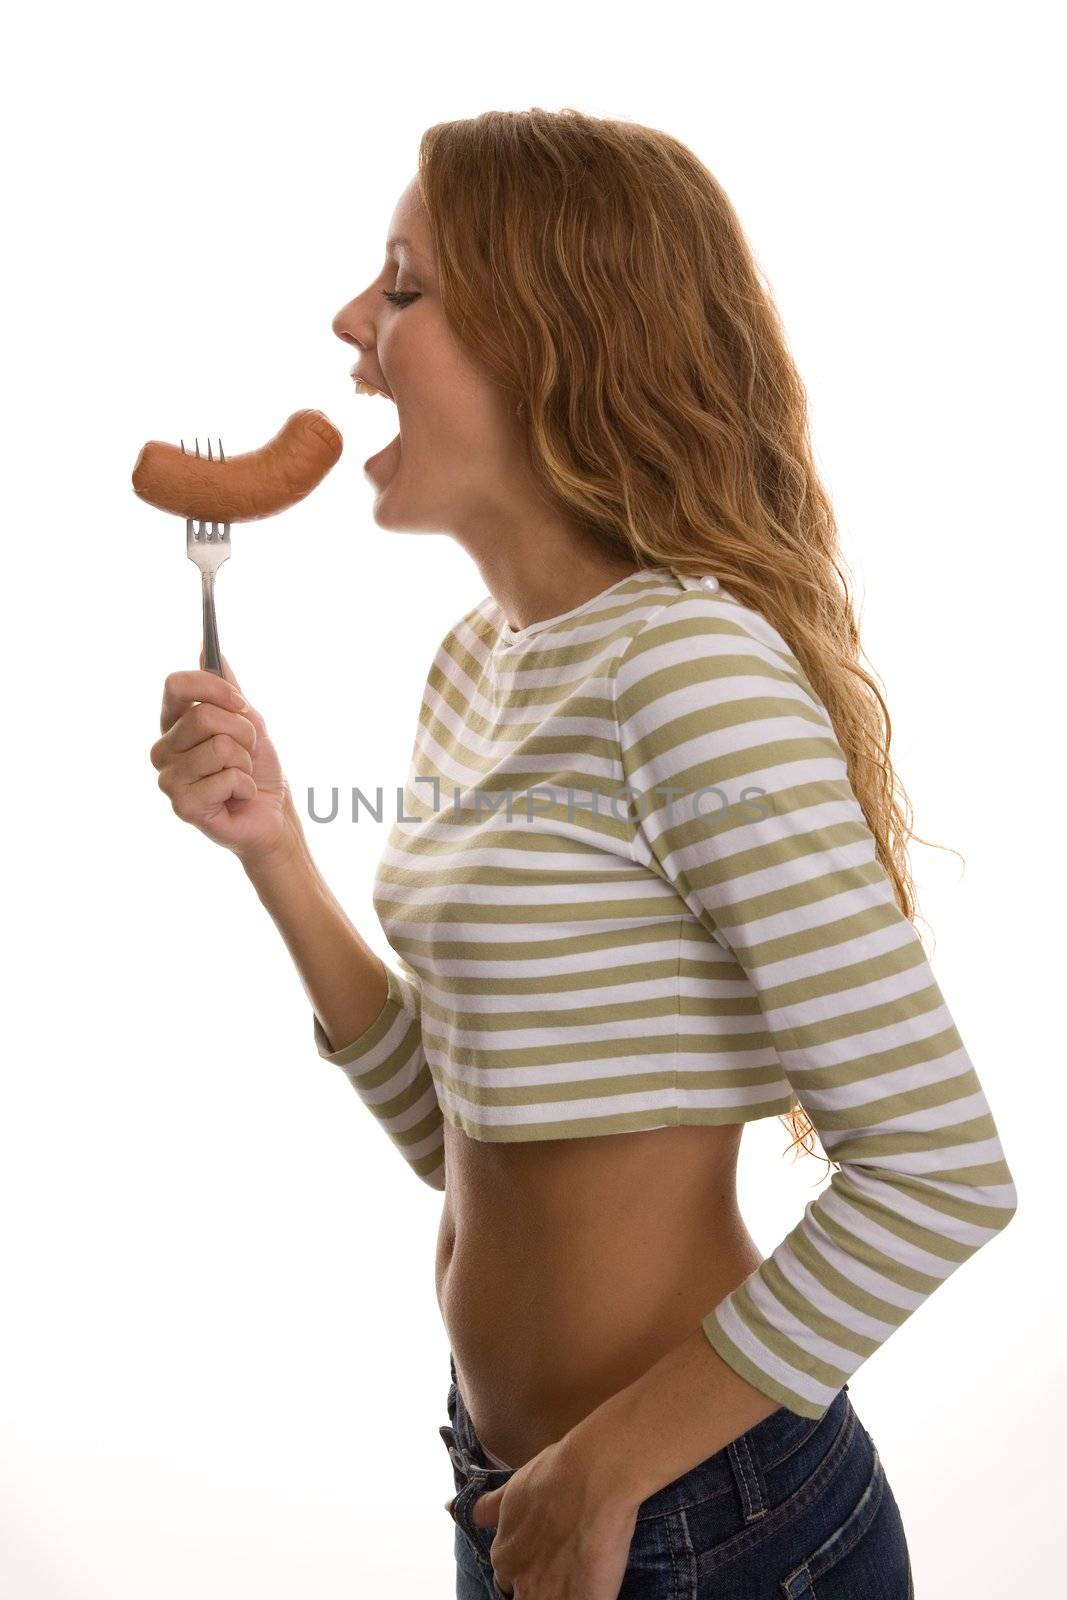 red-haired girl eating a sausage on a light background